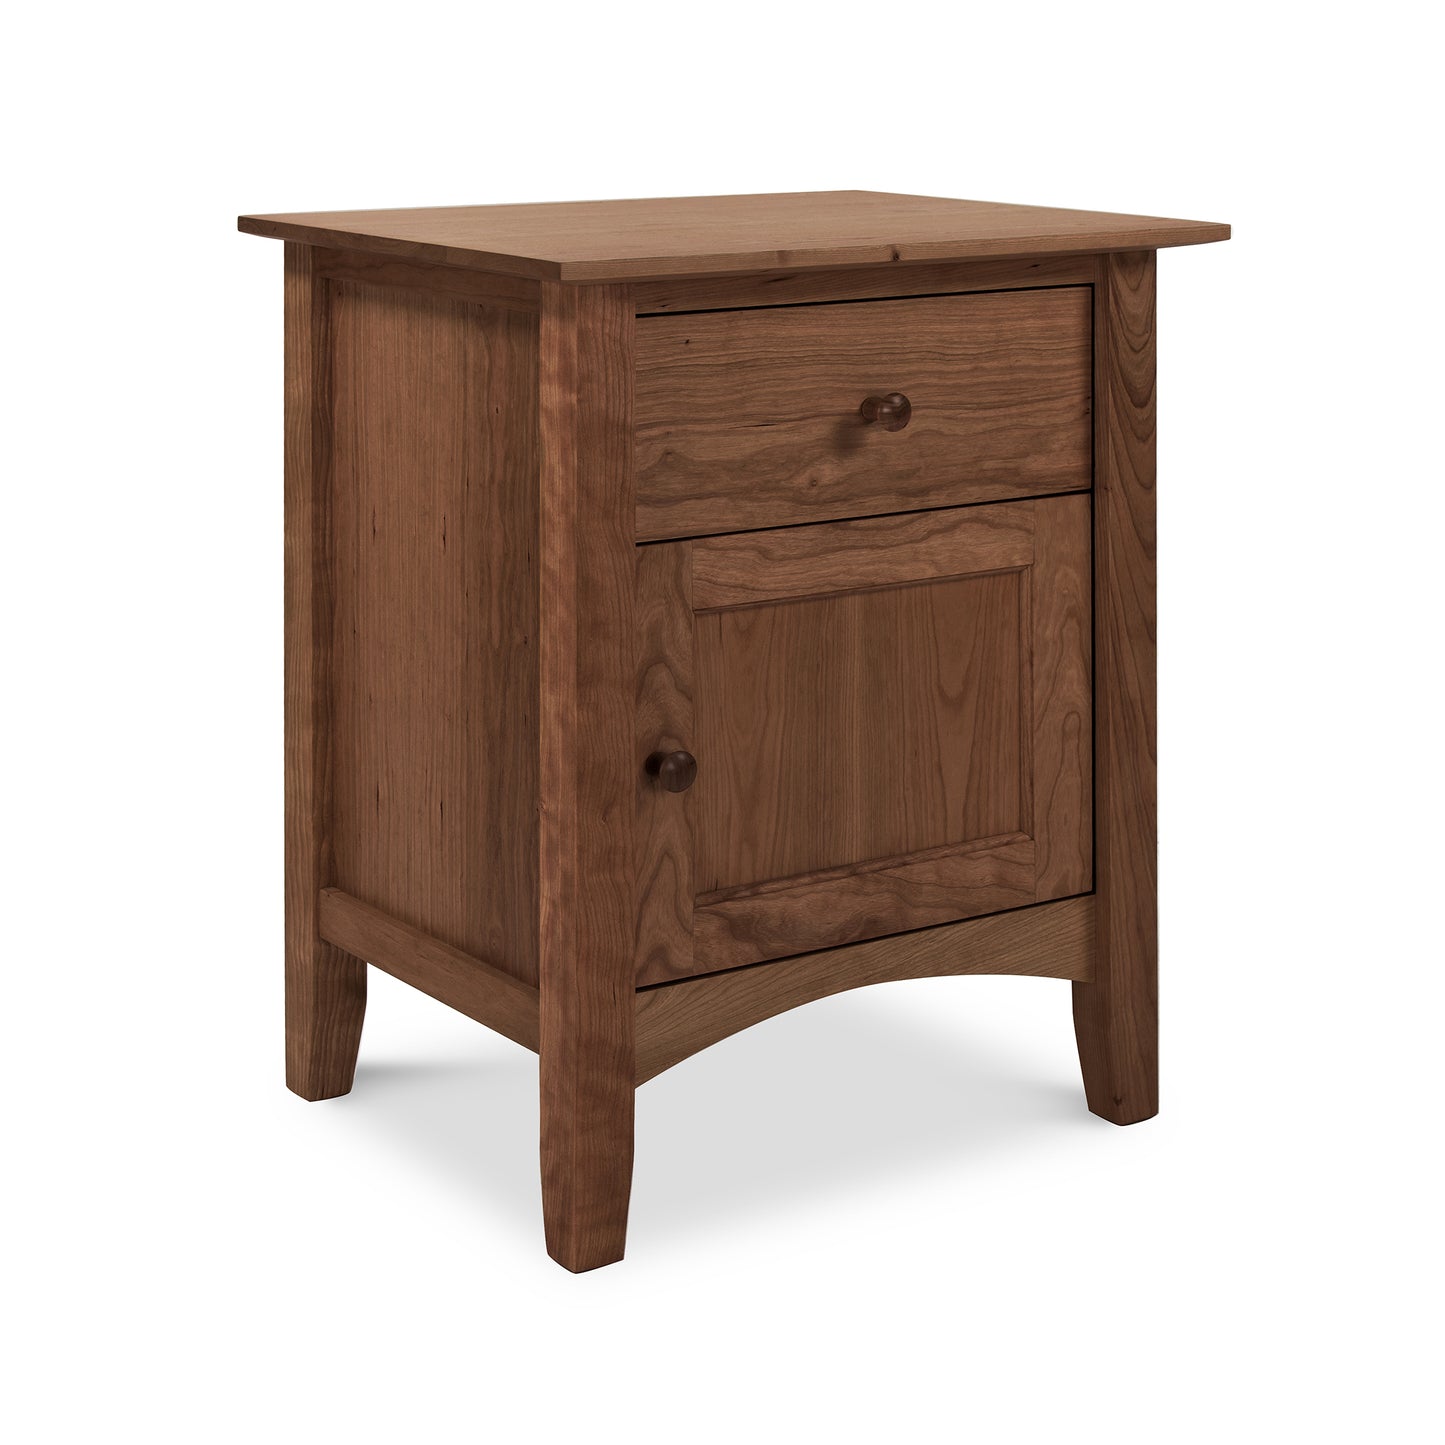 A small wooden American Shaker 1-Drawer Nightstand with Door showcasing Maple Corner Woodworks craftsmanship and natural cherry wood.